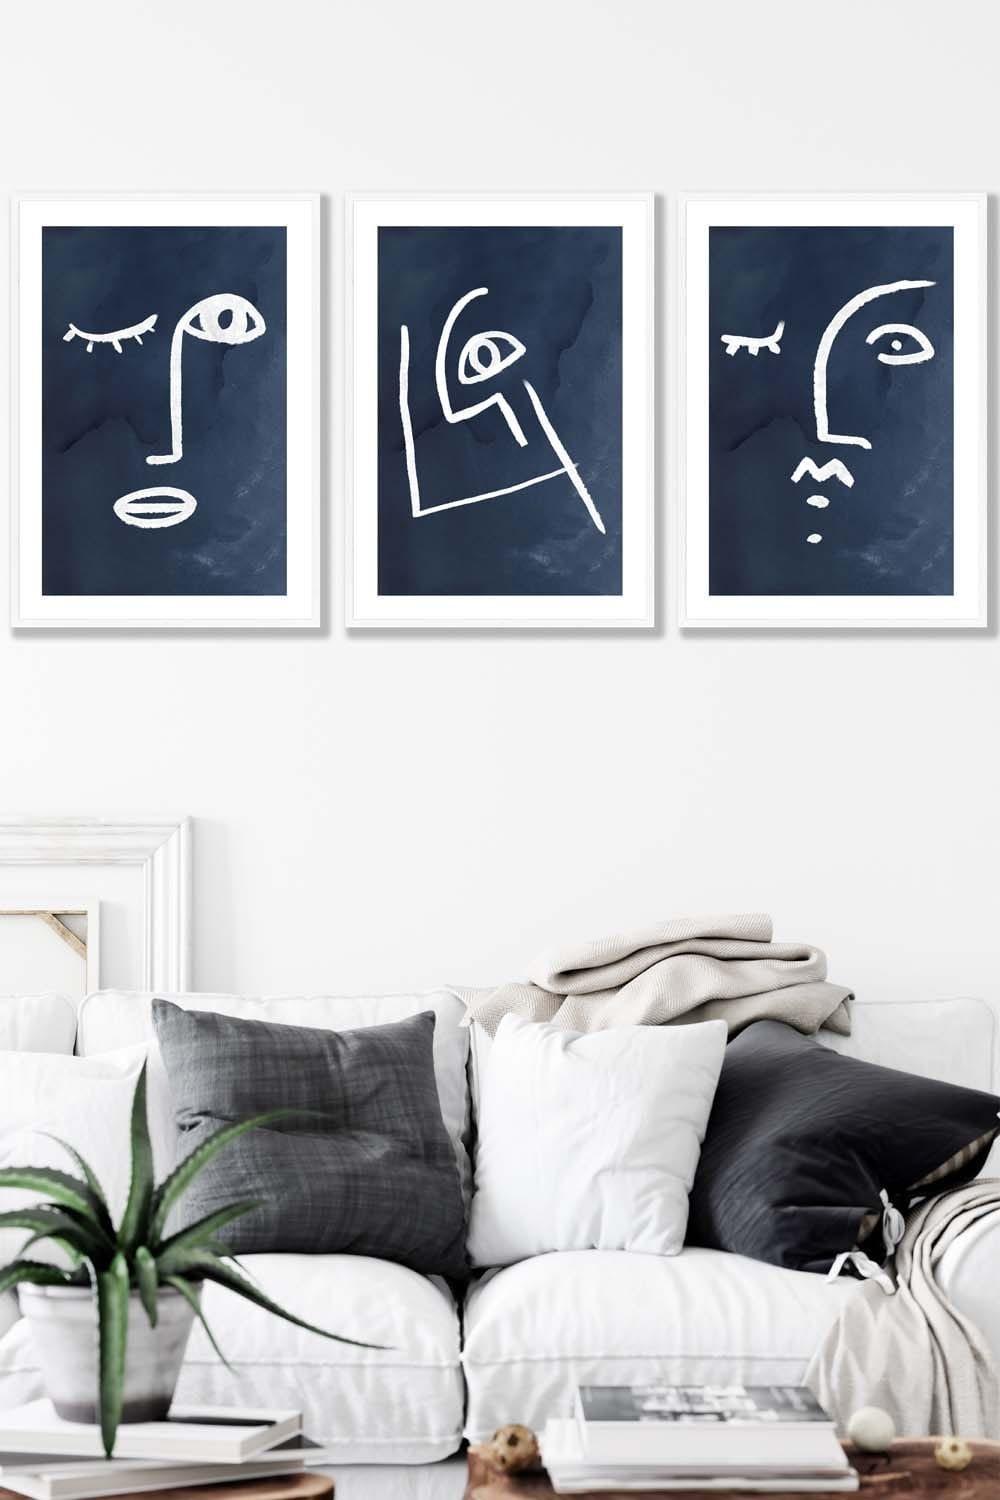 Set of 3 White Framed Navy and White Abstract Line Art Faces Wall Art